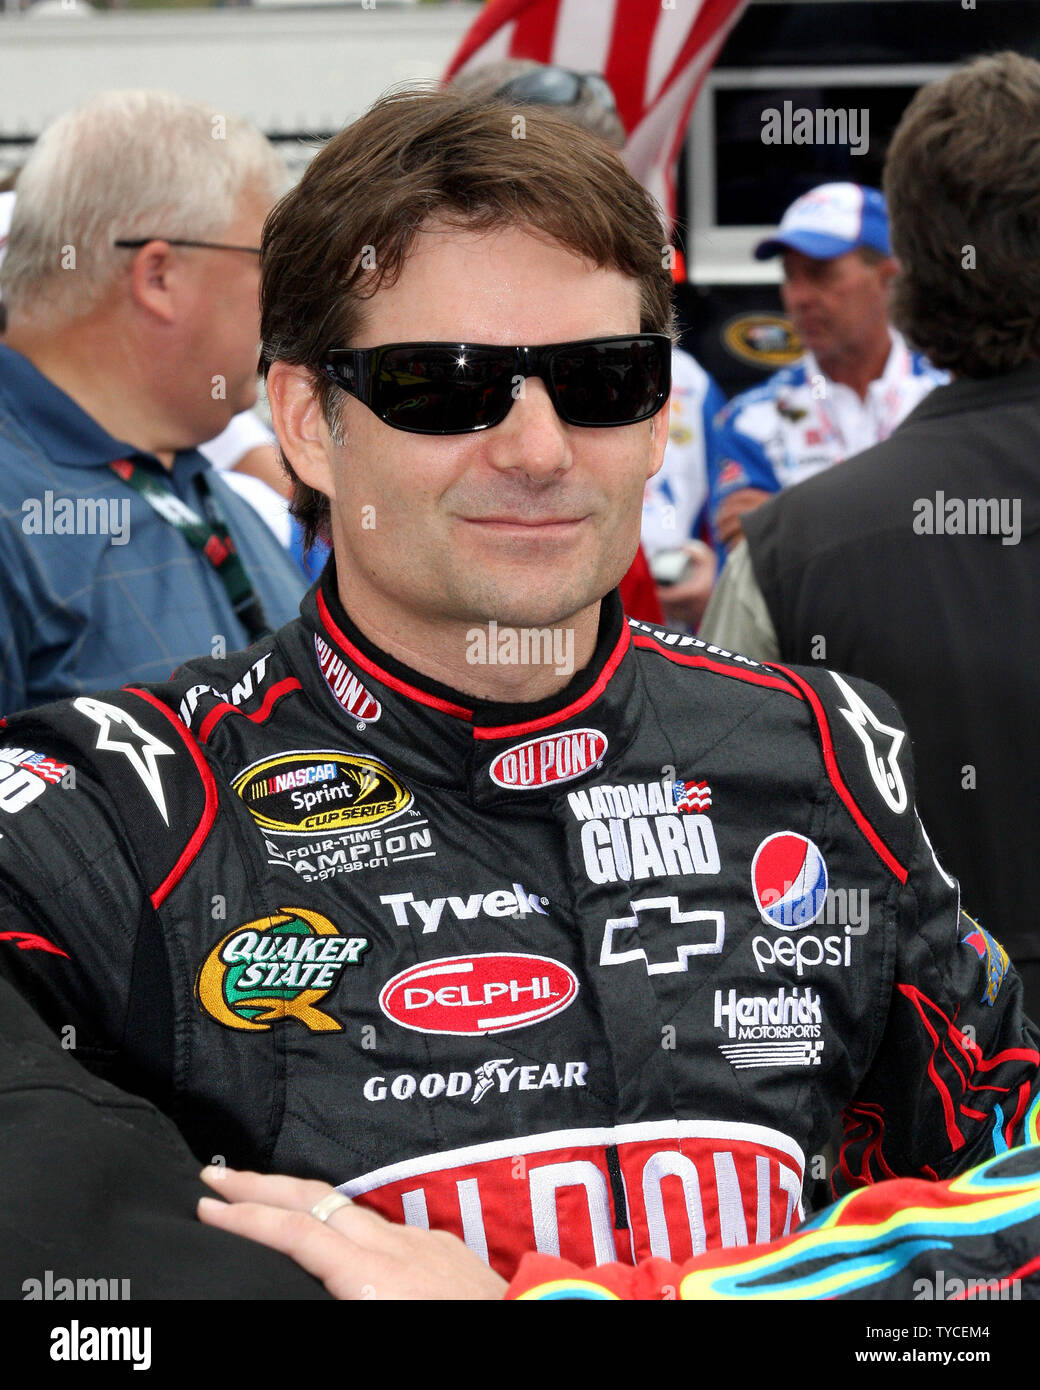 Jeff Gordon waits on pit road for the start of the NASCAR Sprint Cup LENNOX 301 Race at New Hampshire Motor Speedway in Loudon,  New Hampshire on June 27, 2010 . UPI/Malcolm Hope Stock Photo